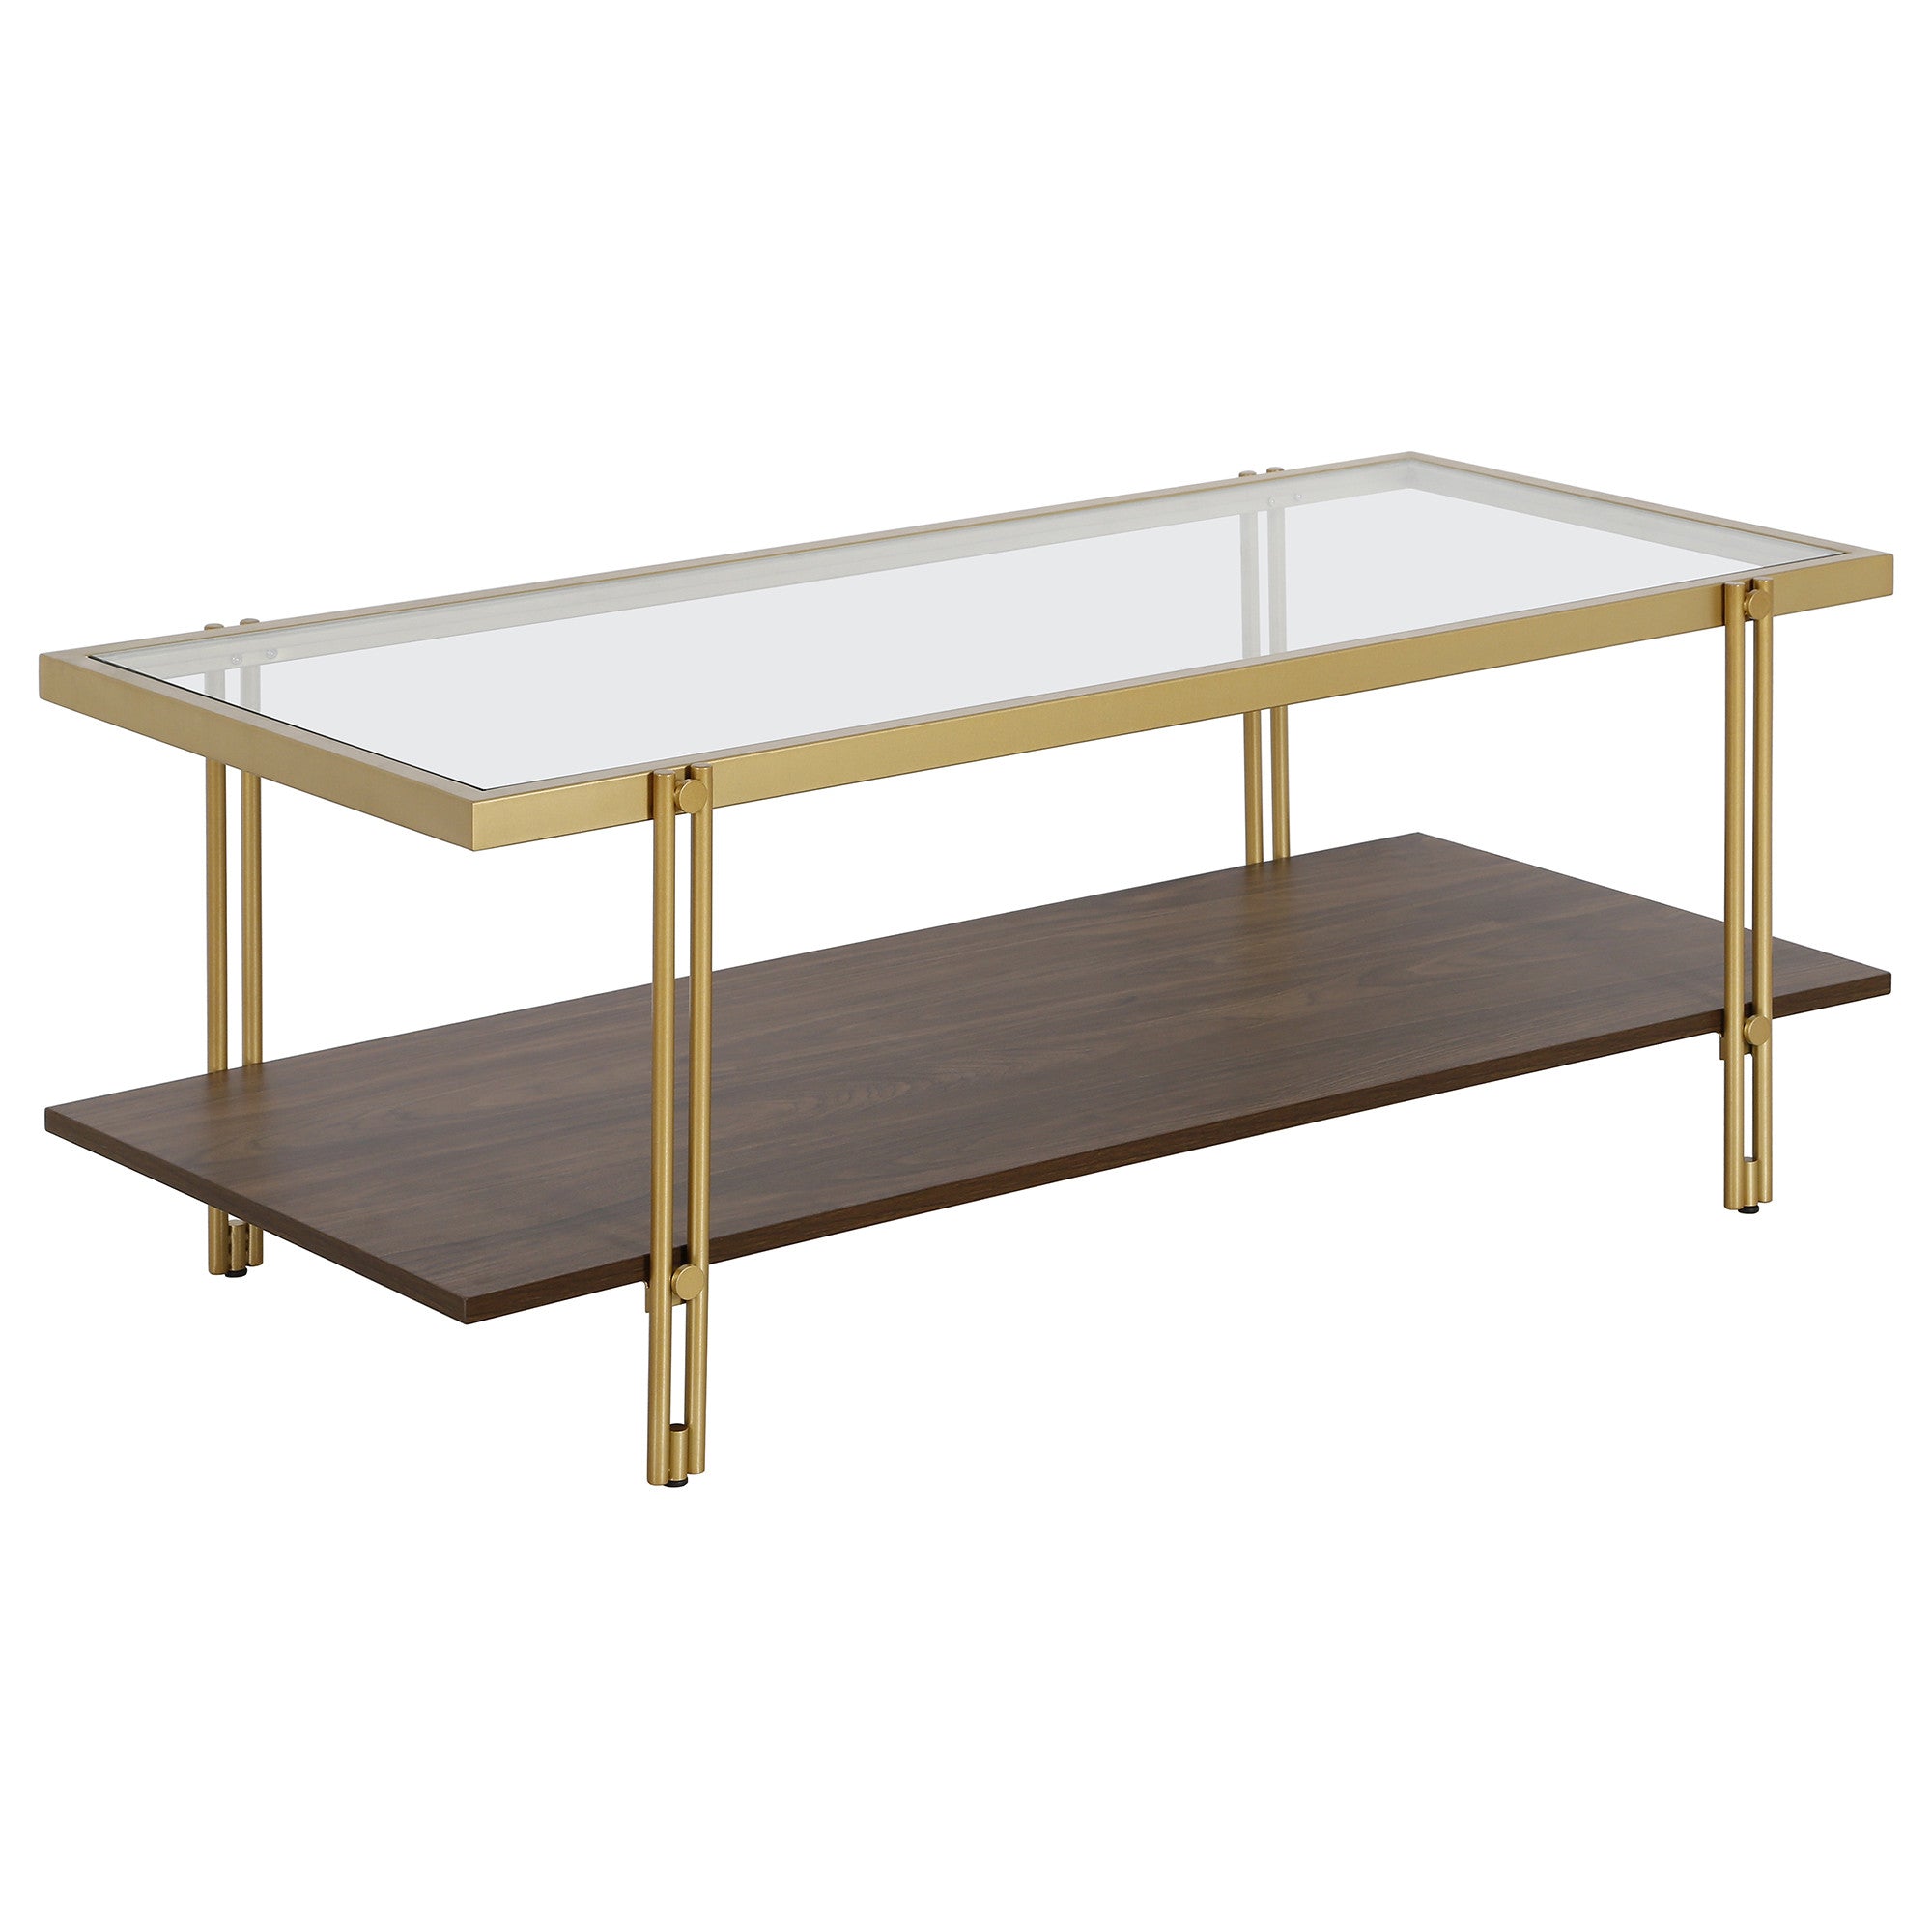 45" Brown And Gold Glass And Steel Coffee Table With Shelf